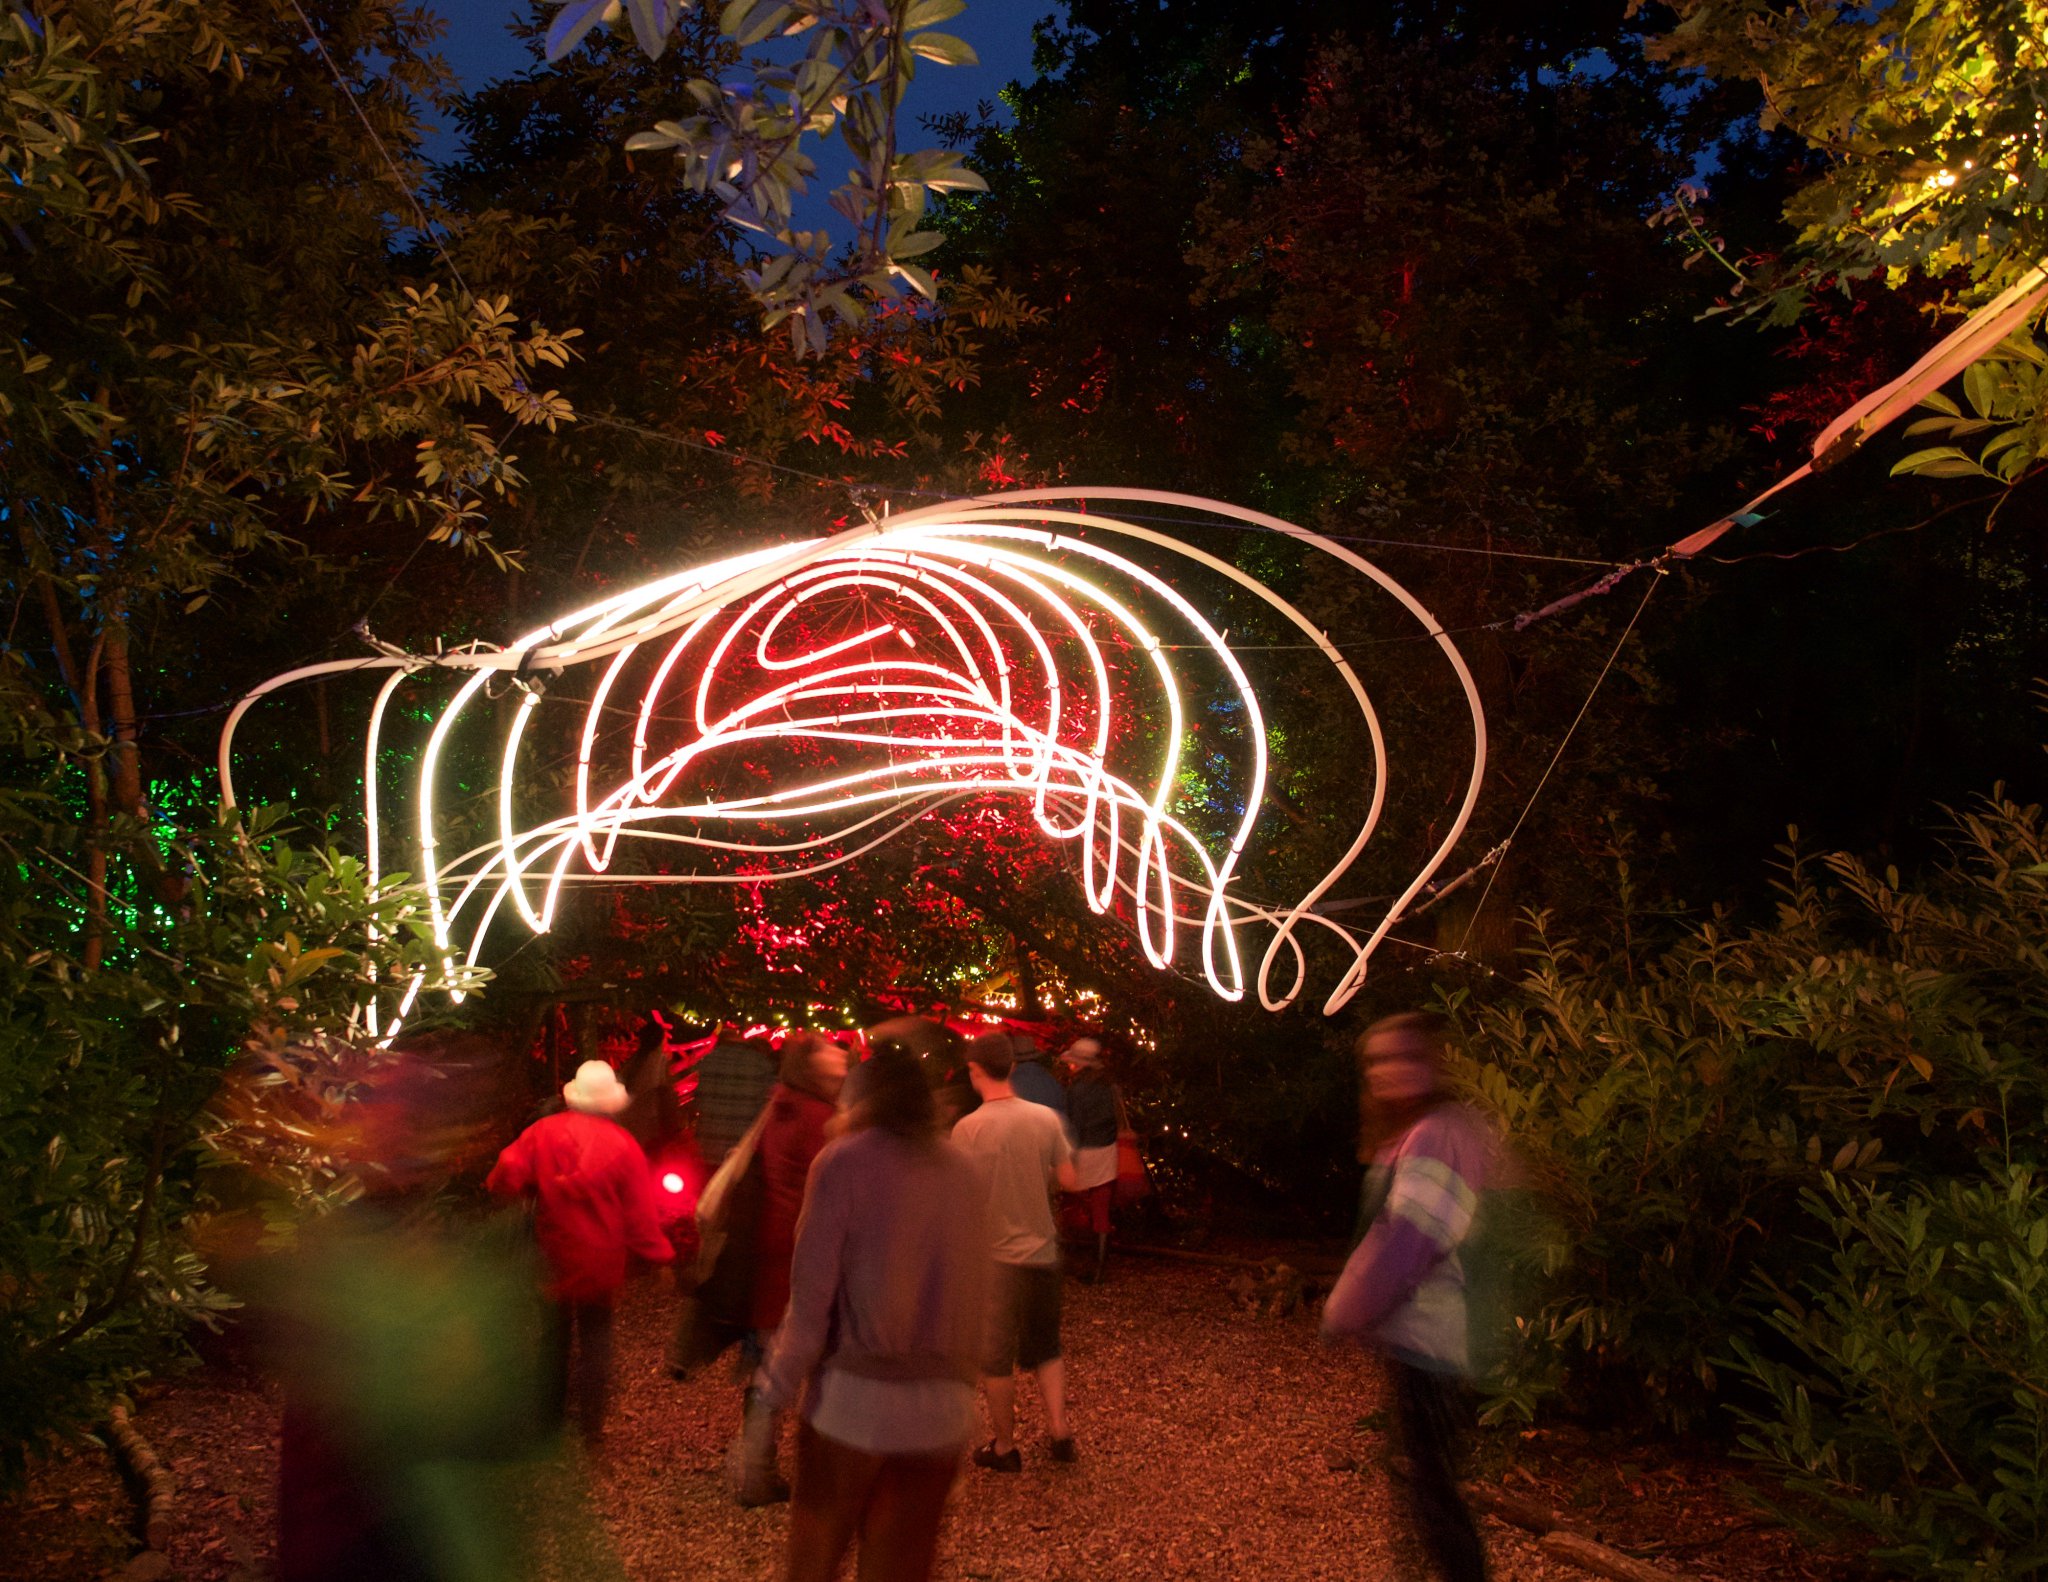 Spiral of Lights Interactive Installation in a Forest